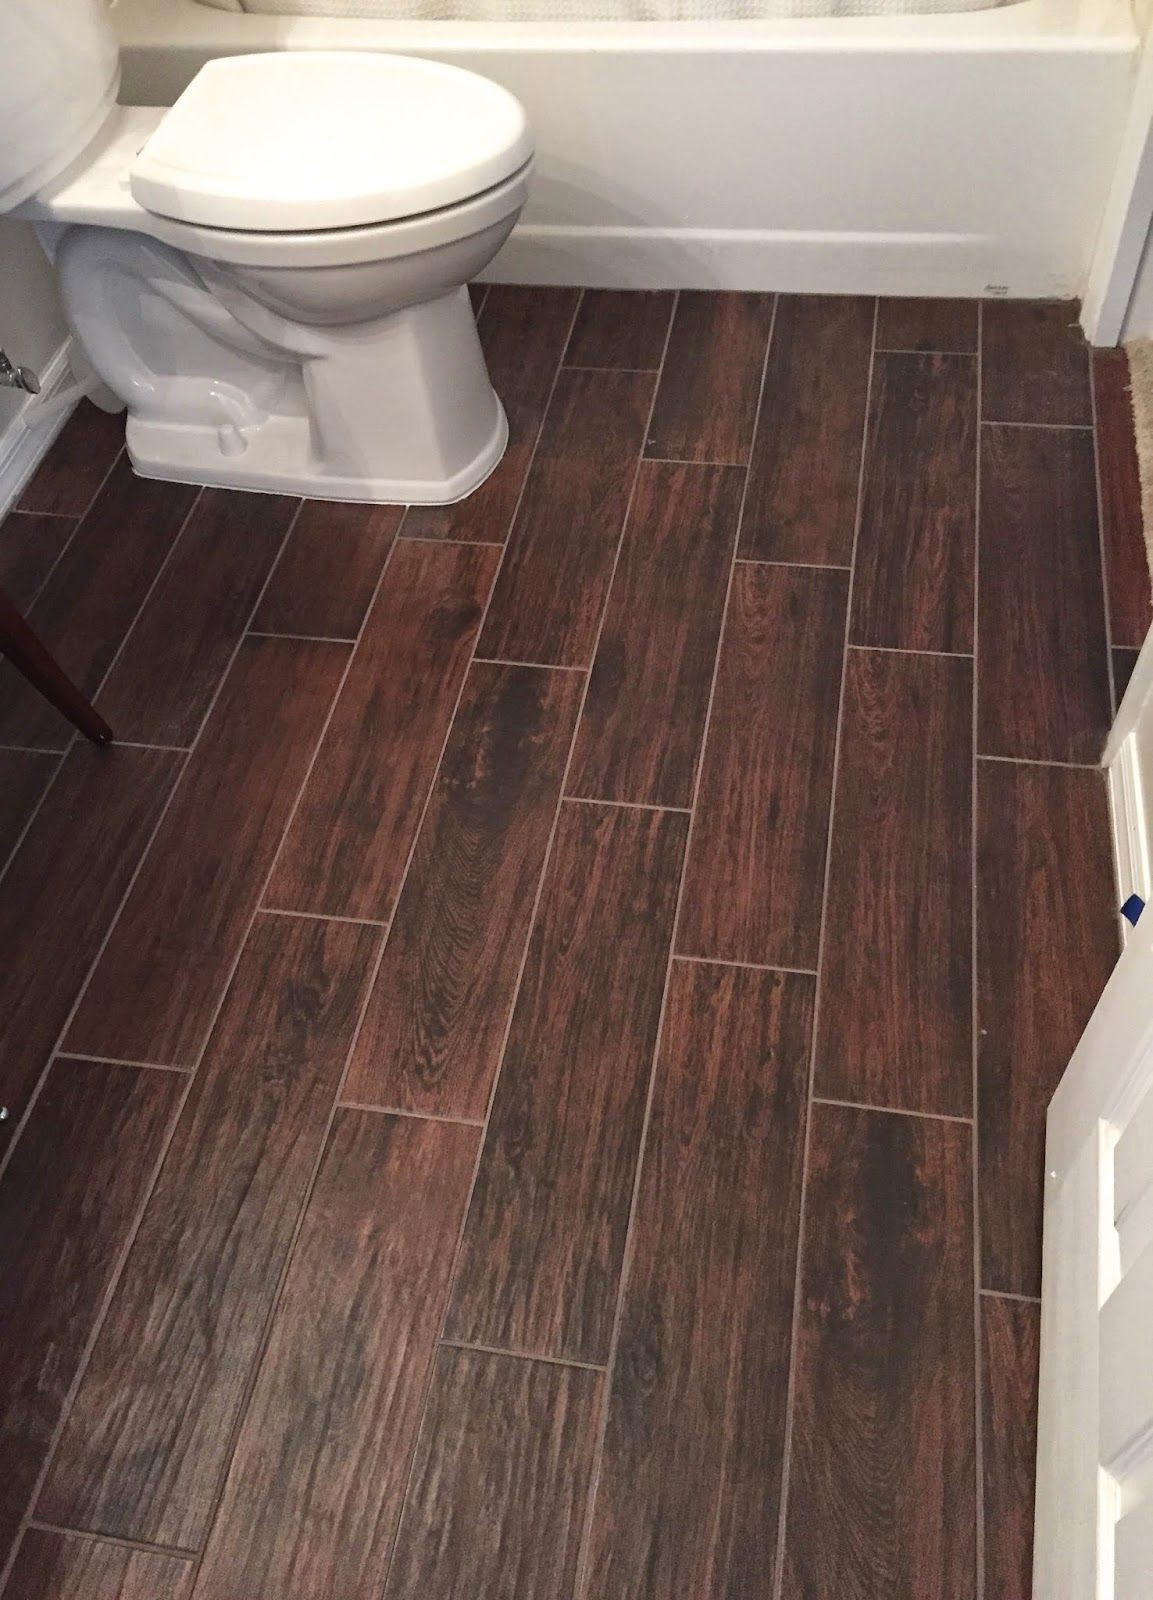 Wood Look Tile Bathroom Floor
 Wood Look Tile – Everything You Want to Know With images